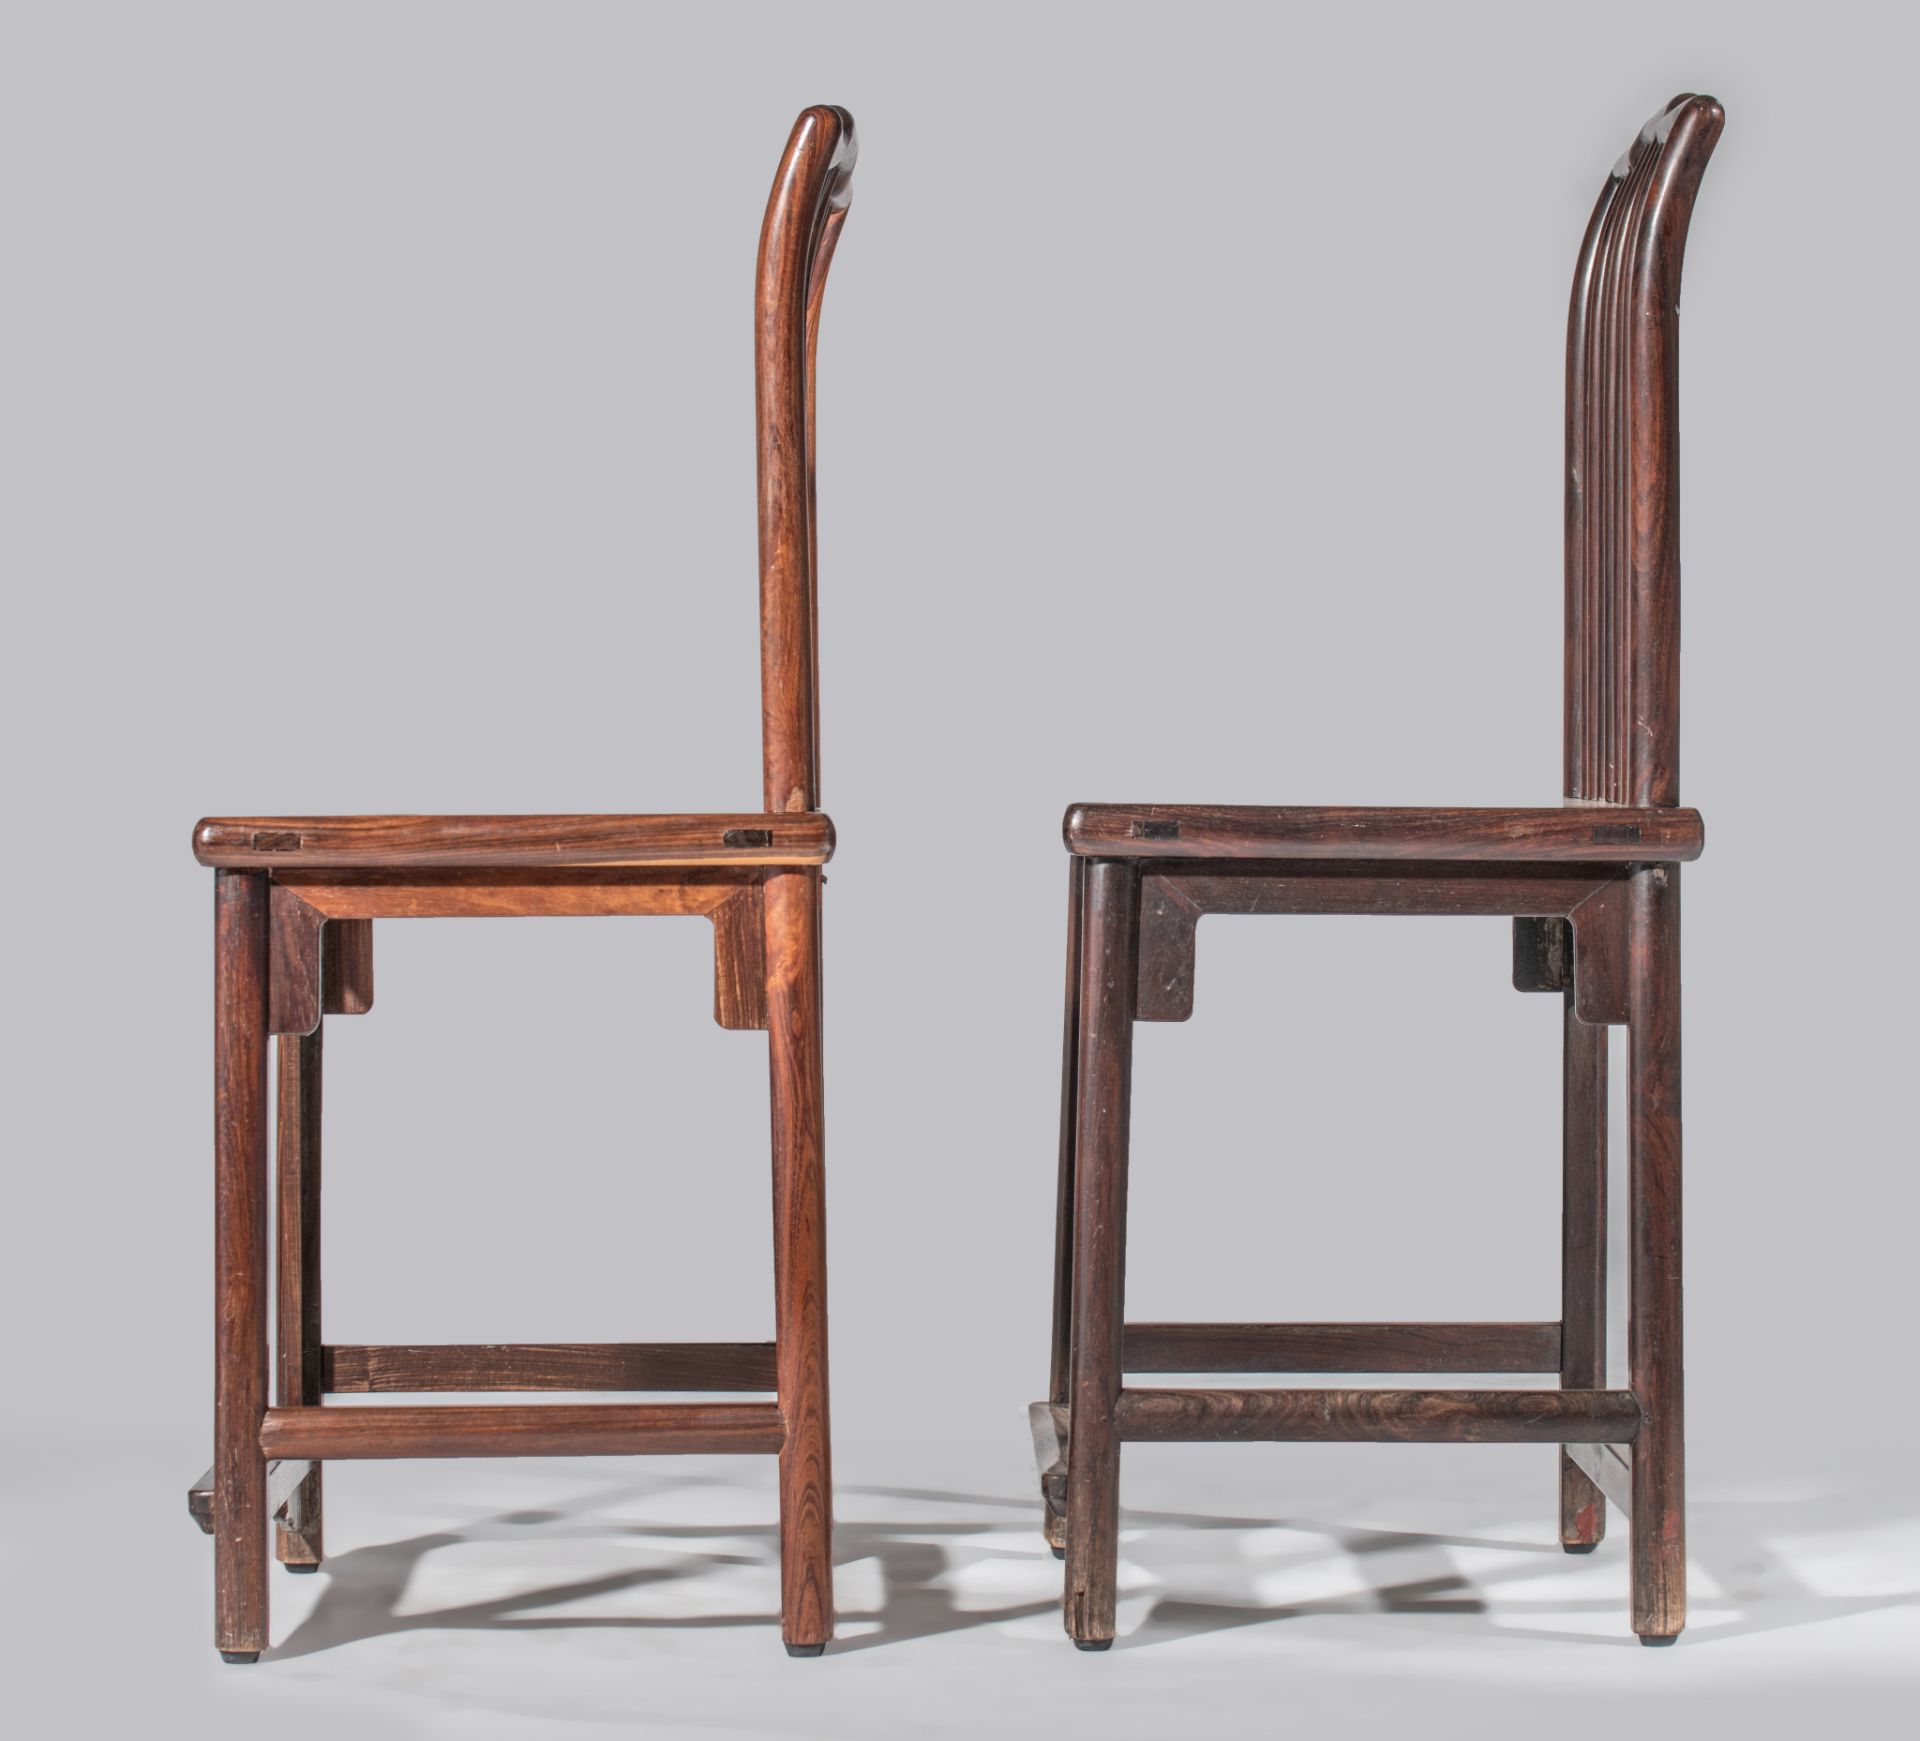 A pair of Chinese hardwood spindle back chairs, Republic period, H 92 - W 52,5 - D 40 cm - Image 4 of 8